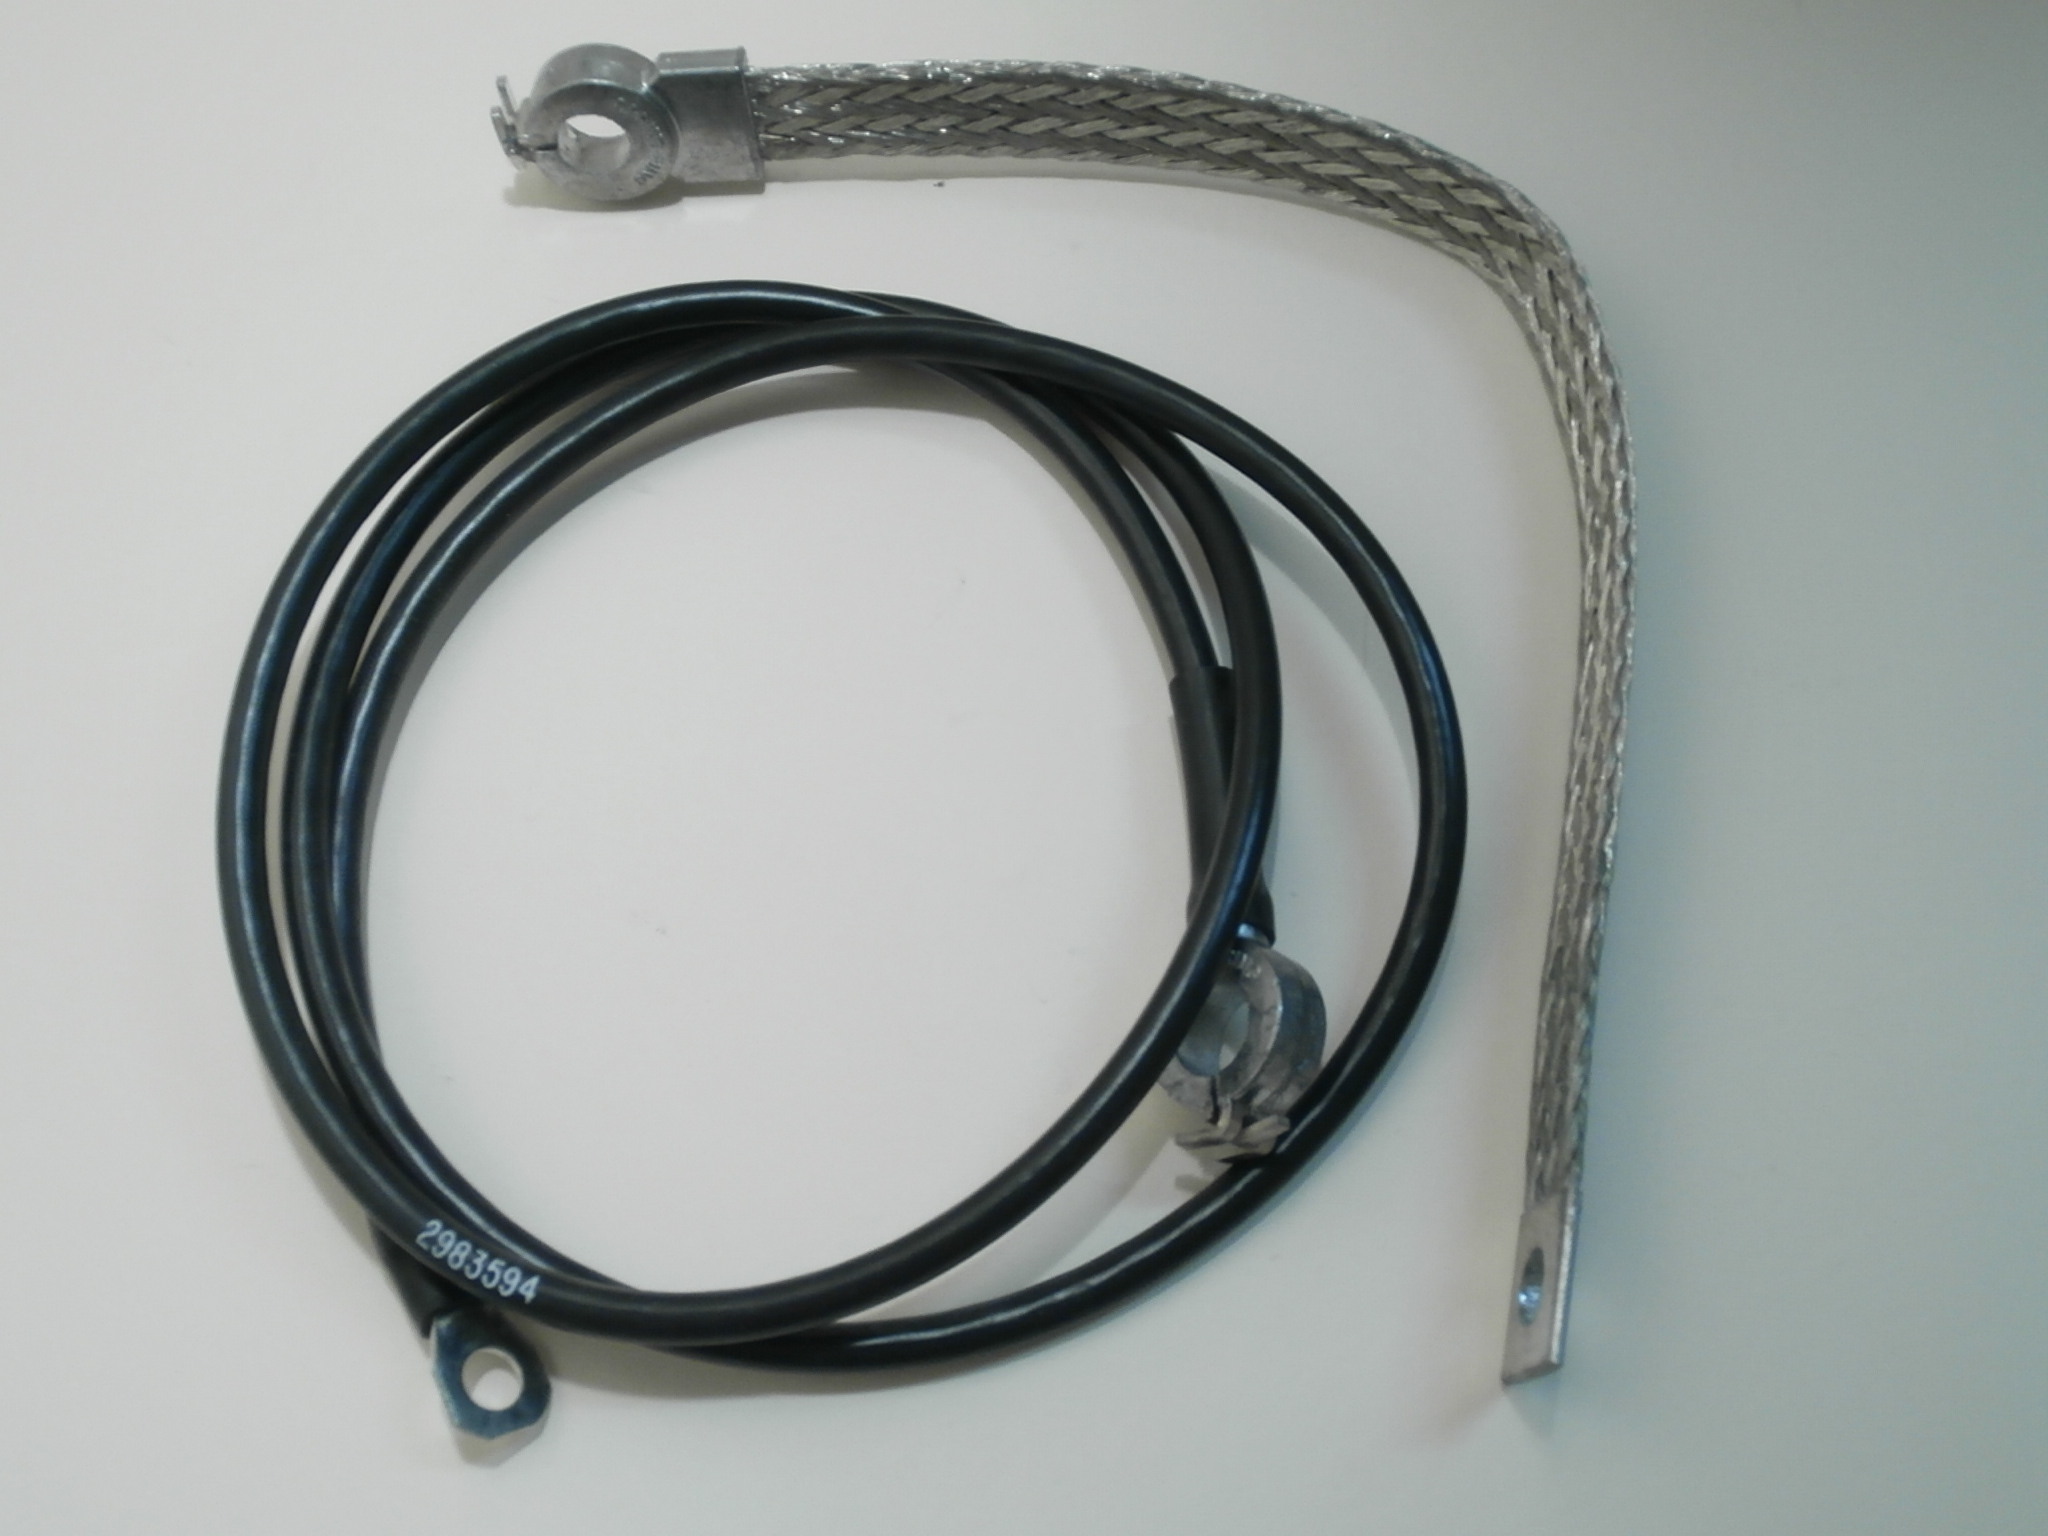 Battery Cables S/B W/AC. One Braided Neg Cable, 1963